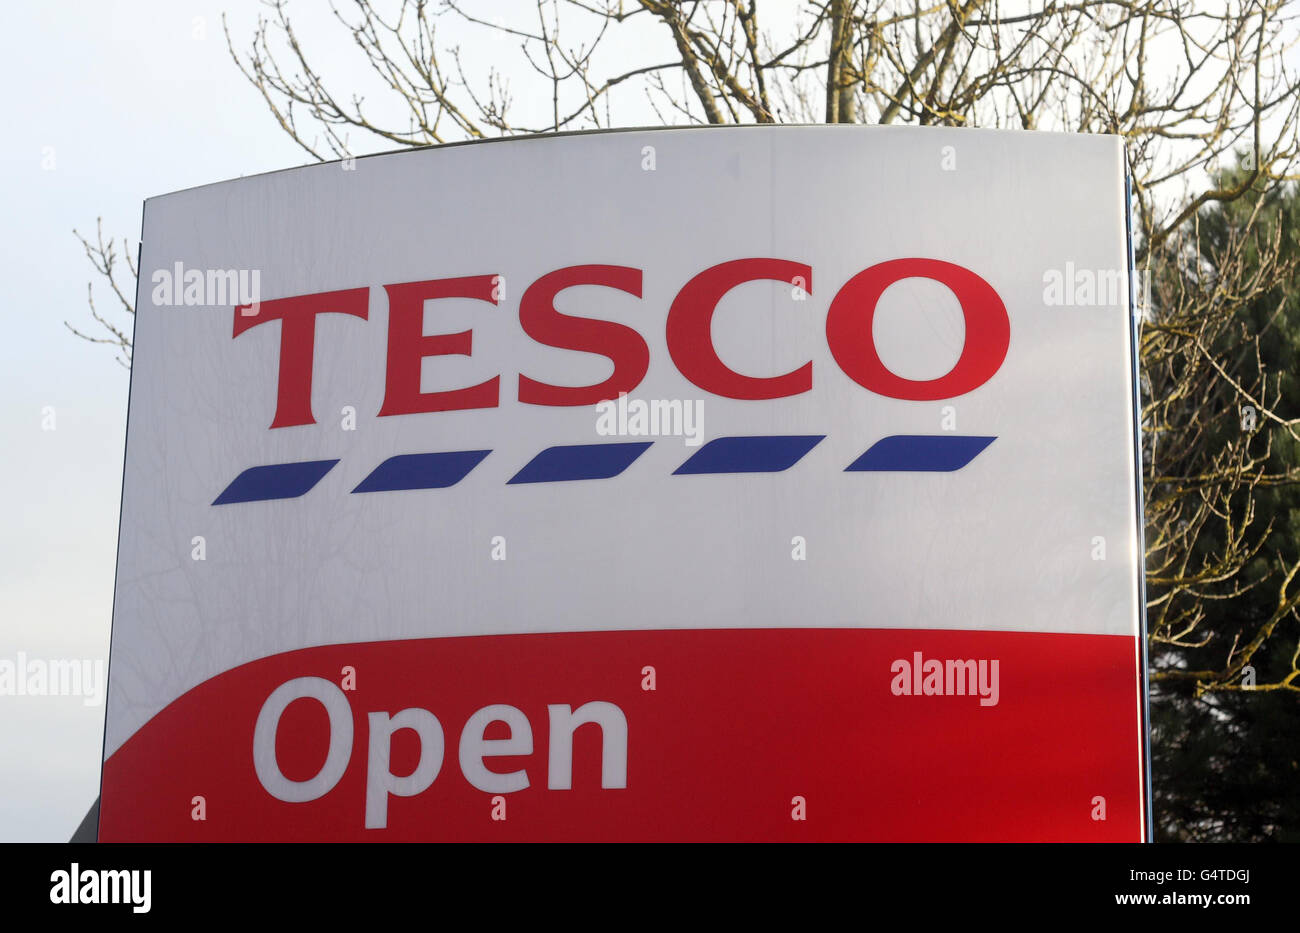 The Tesco superstore in Henley-on-Thames, Oxfordshire where chef Antony Worrall Thompson was arrested for shop lifting last Friday. Stock Photo